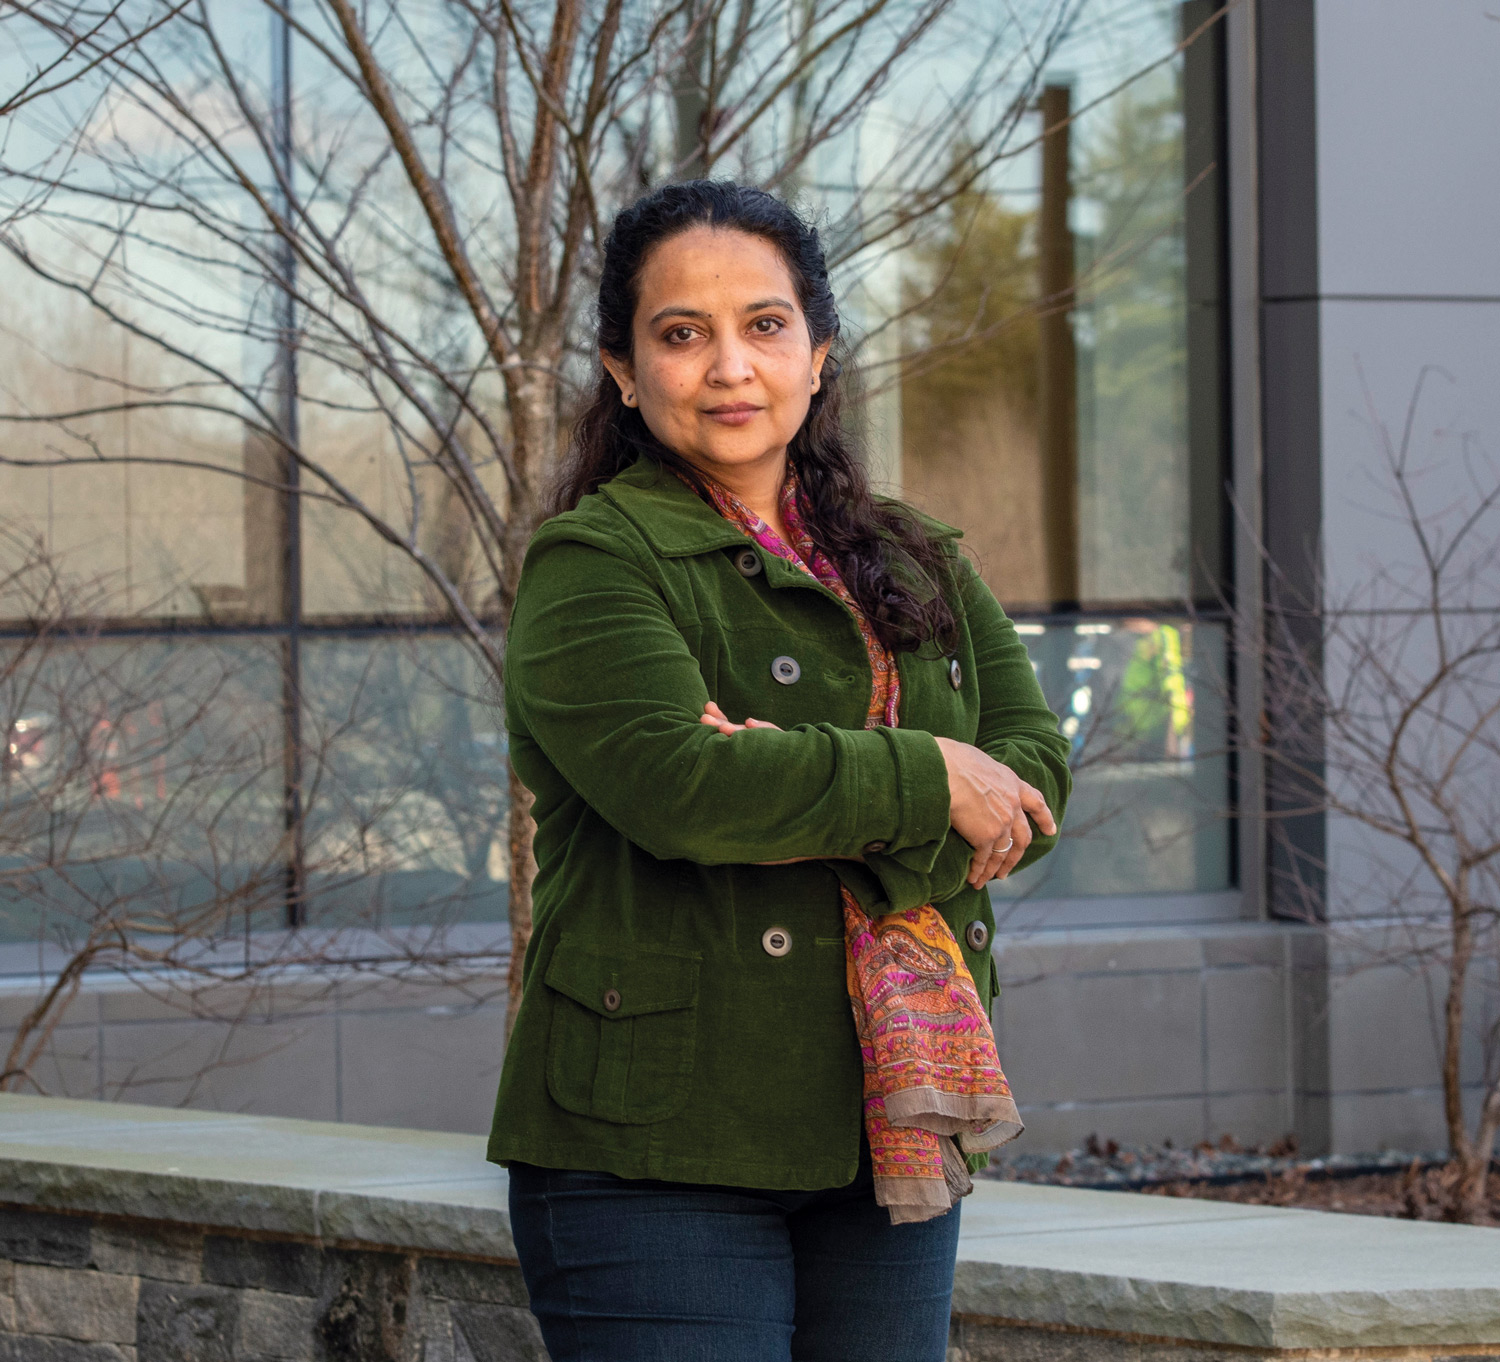 Thanks to an Accelerator award, Arti Gaur, PhD, is one step closer to bringing an investigational new drug into phase 1 trials in humans. Photo by Kata Sasvari.